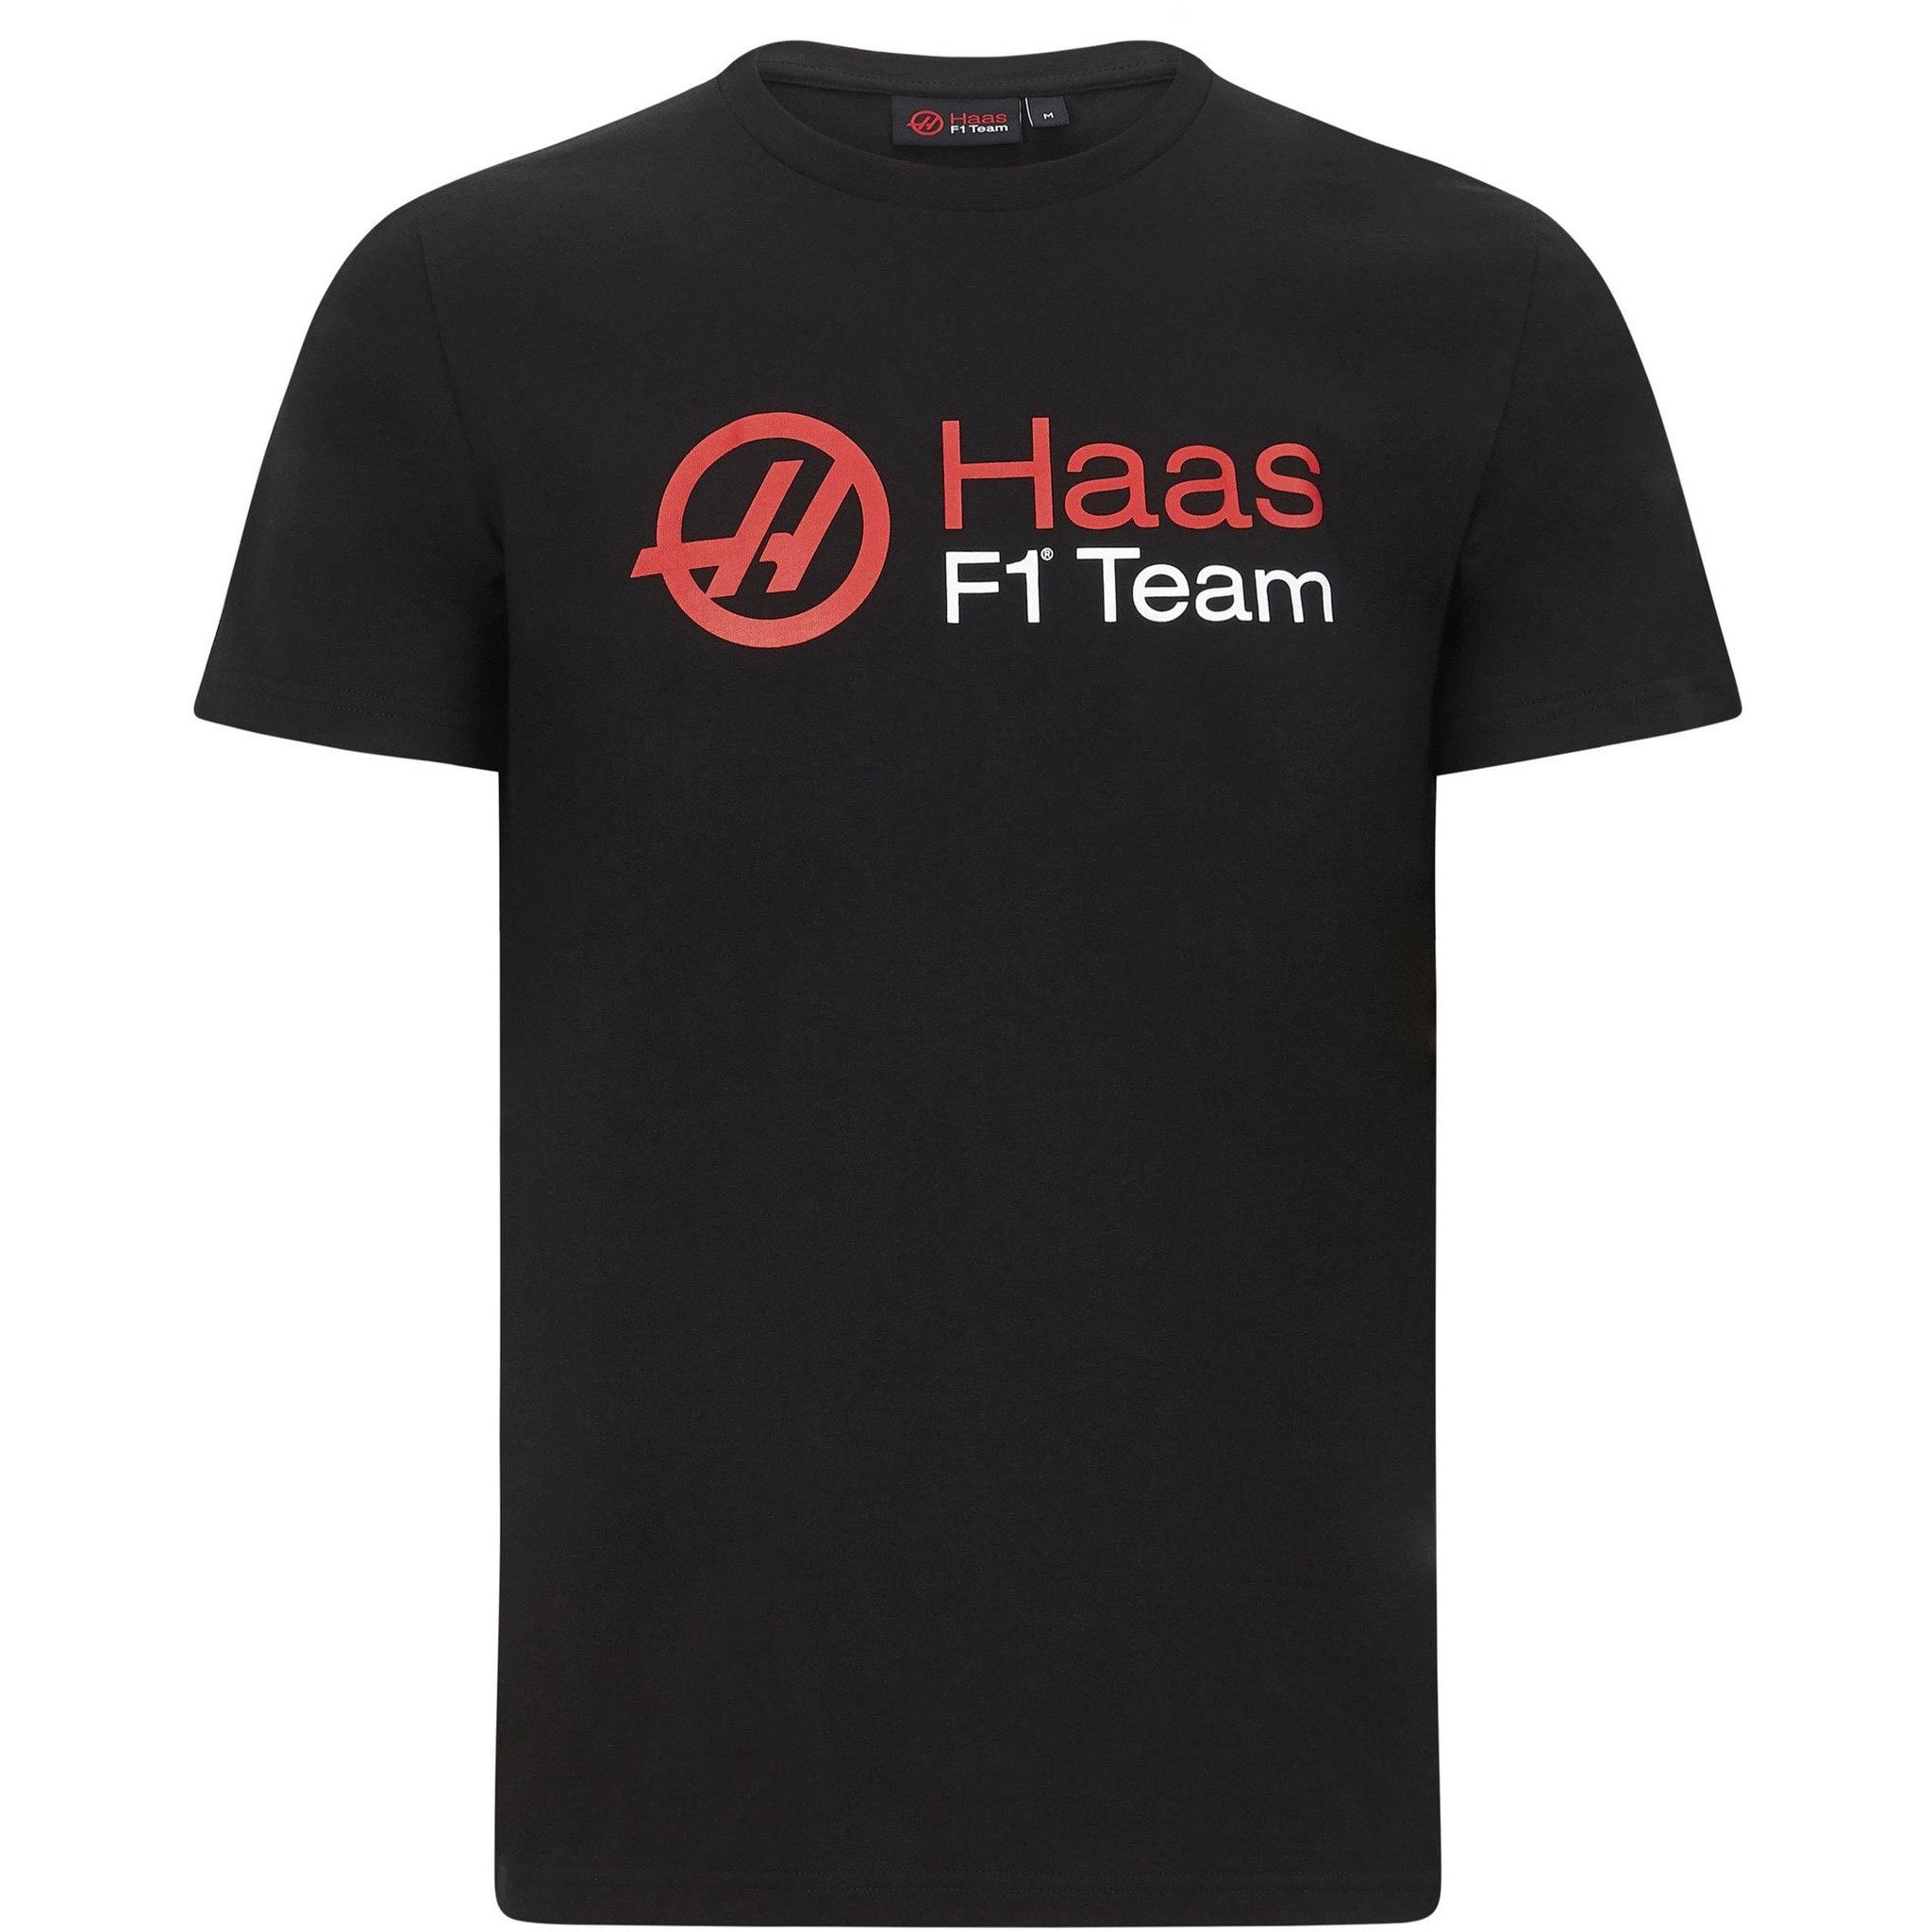 download haas f1 2016 for free